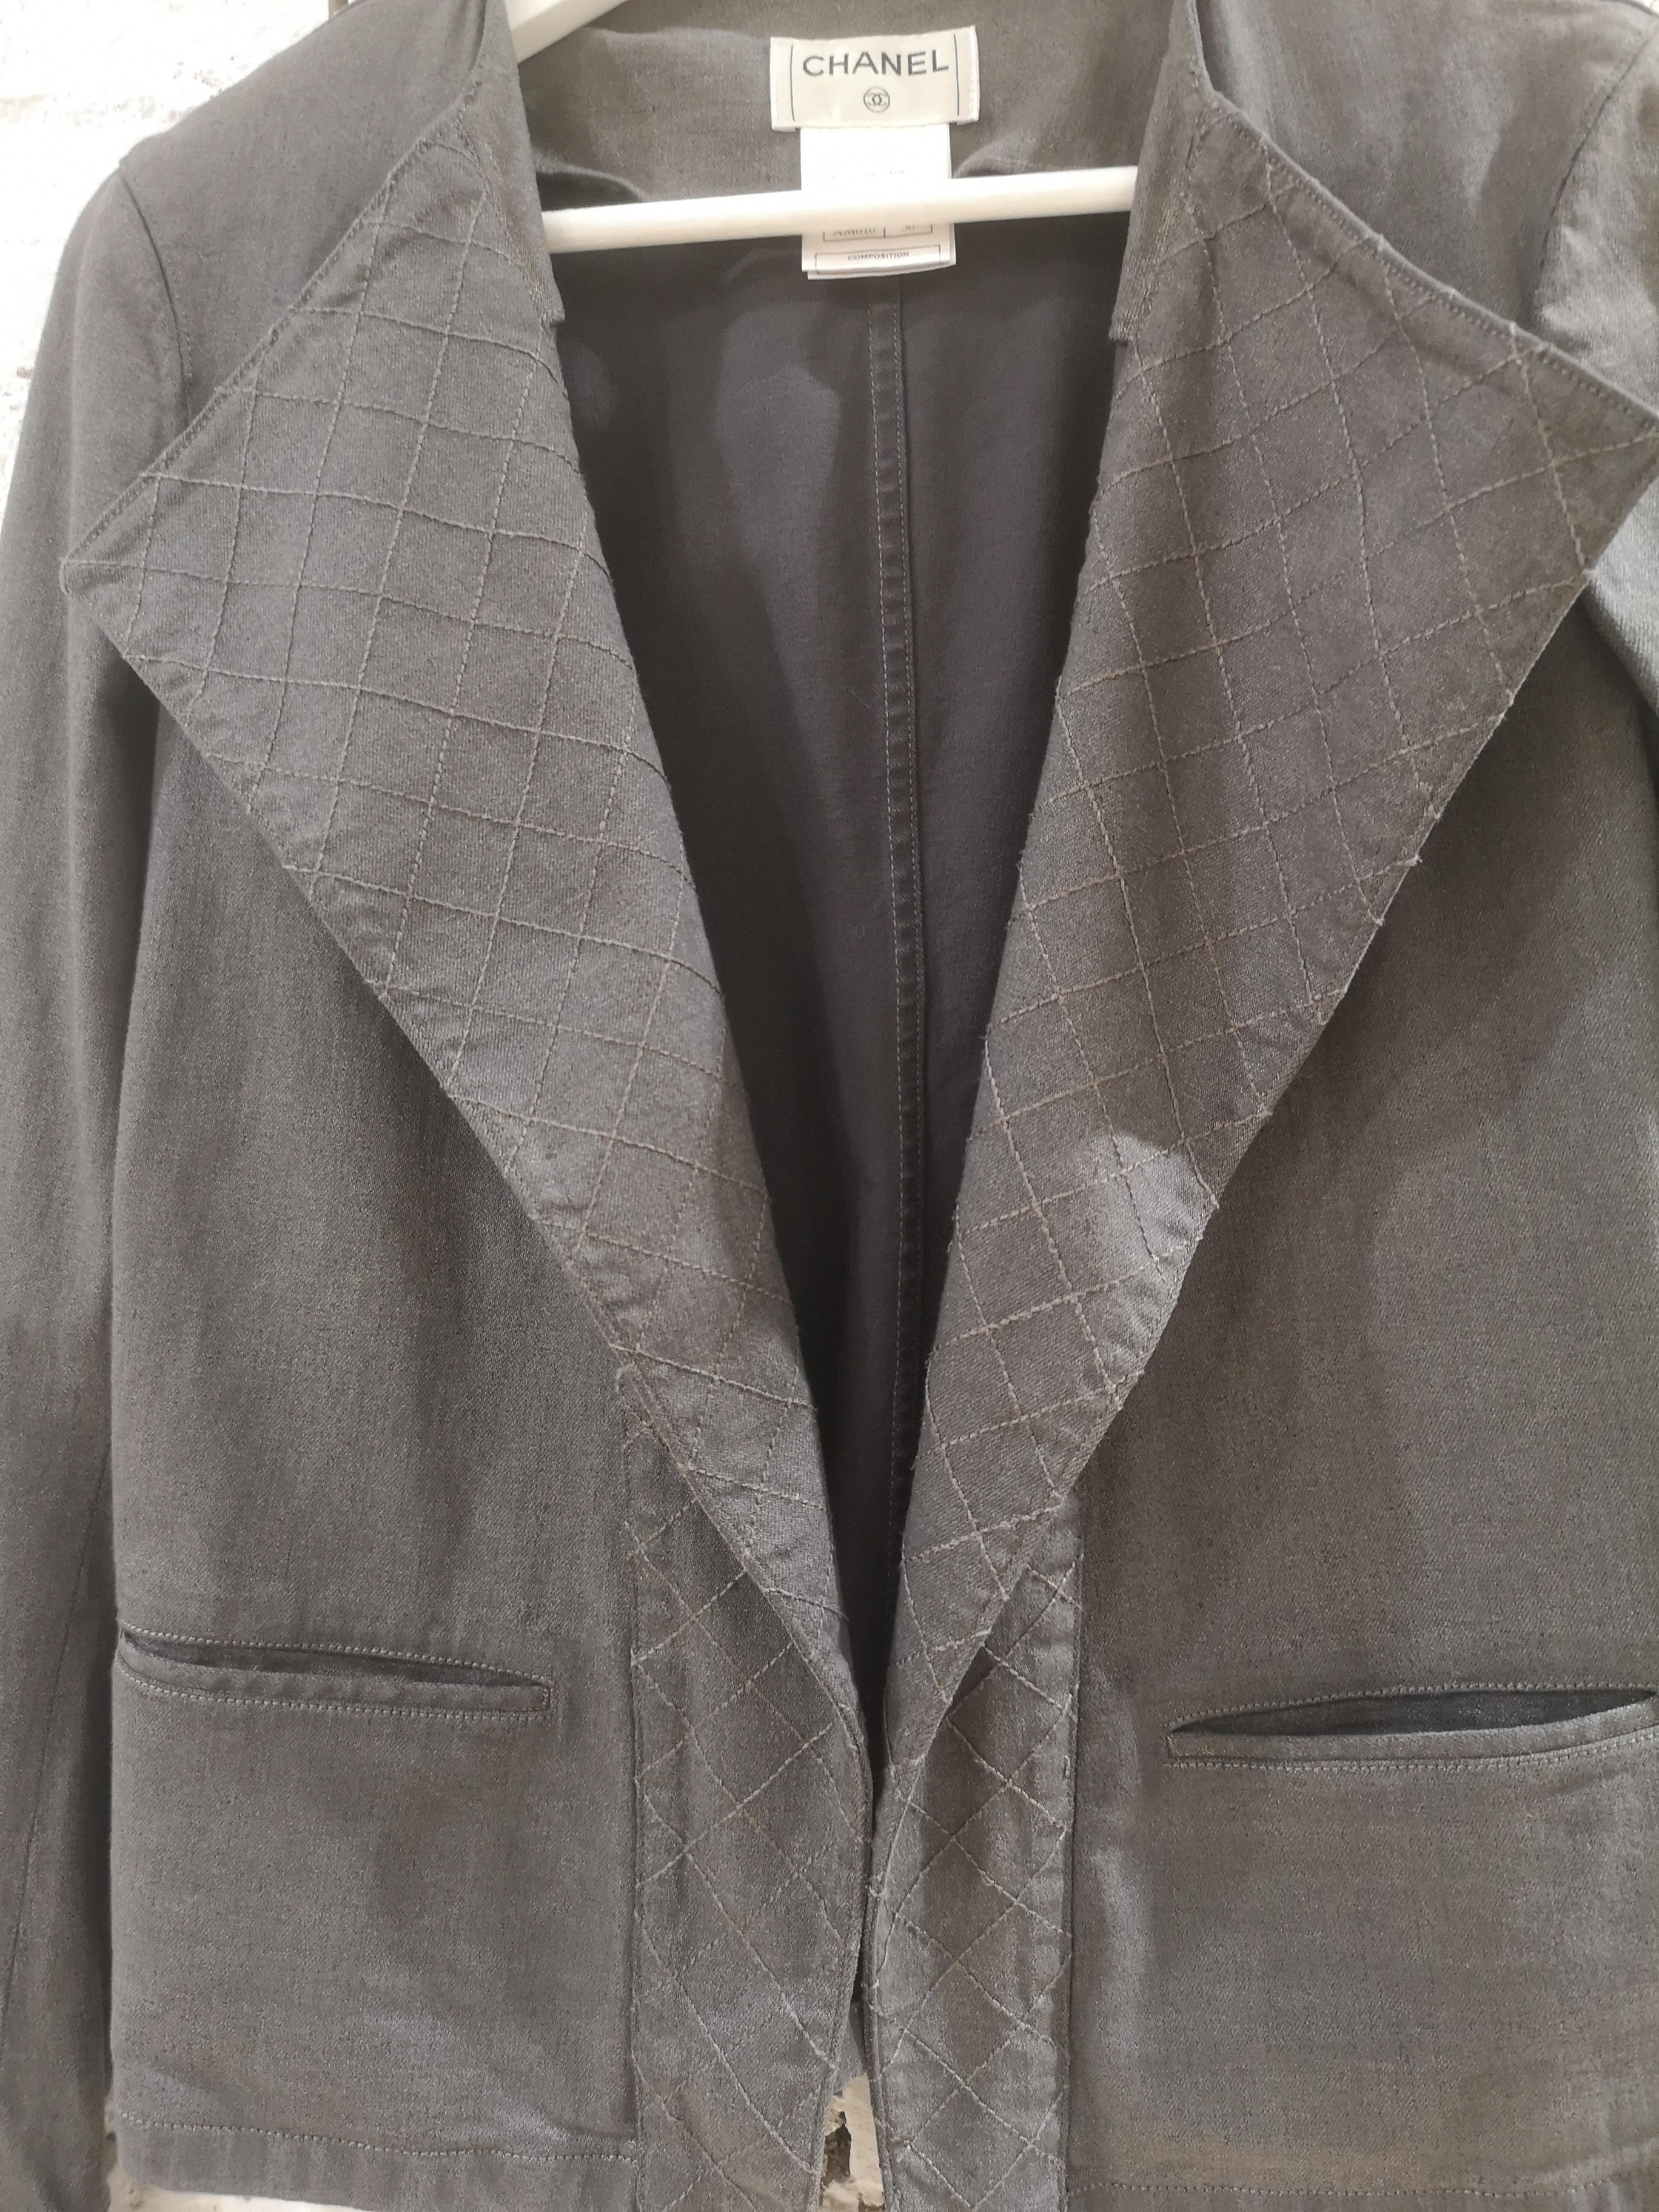 Chanel grey denim jacket In Excellent Condition For Sale In Capri, IT